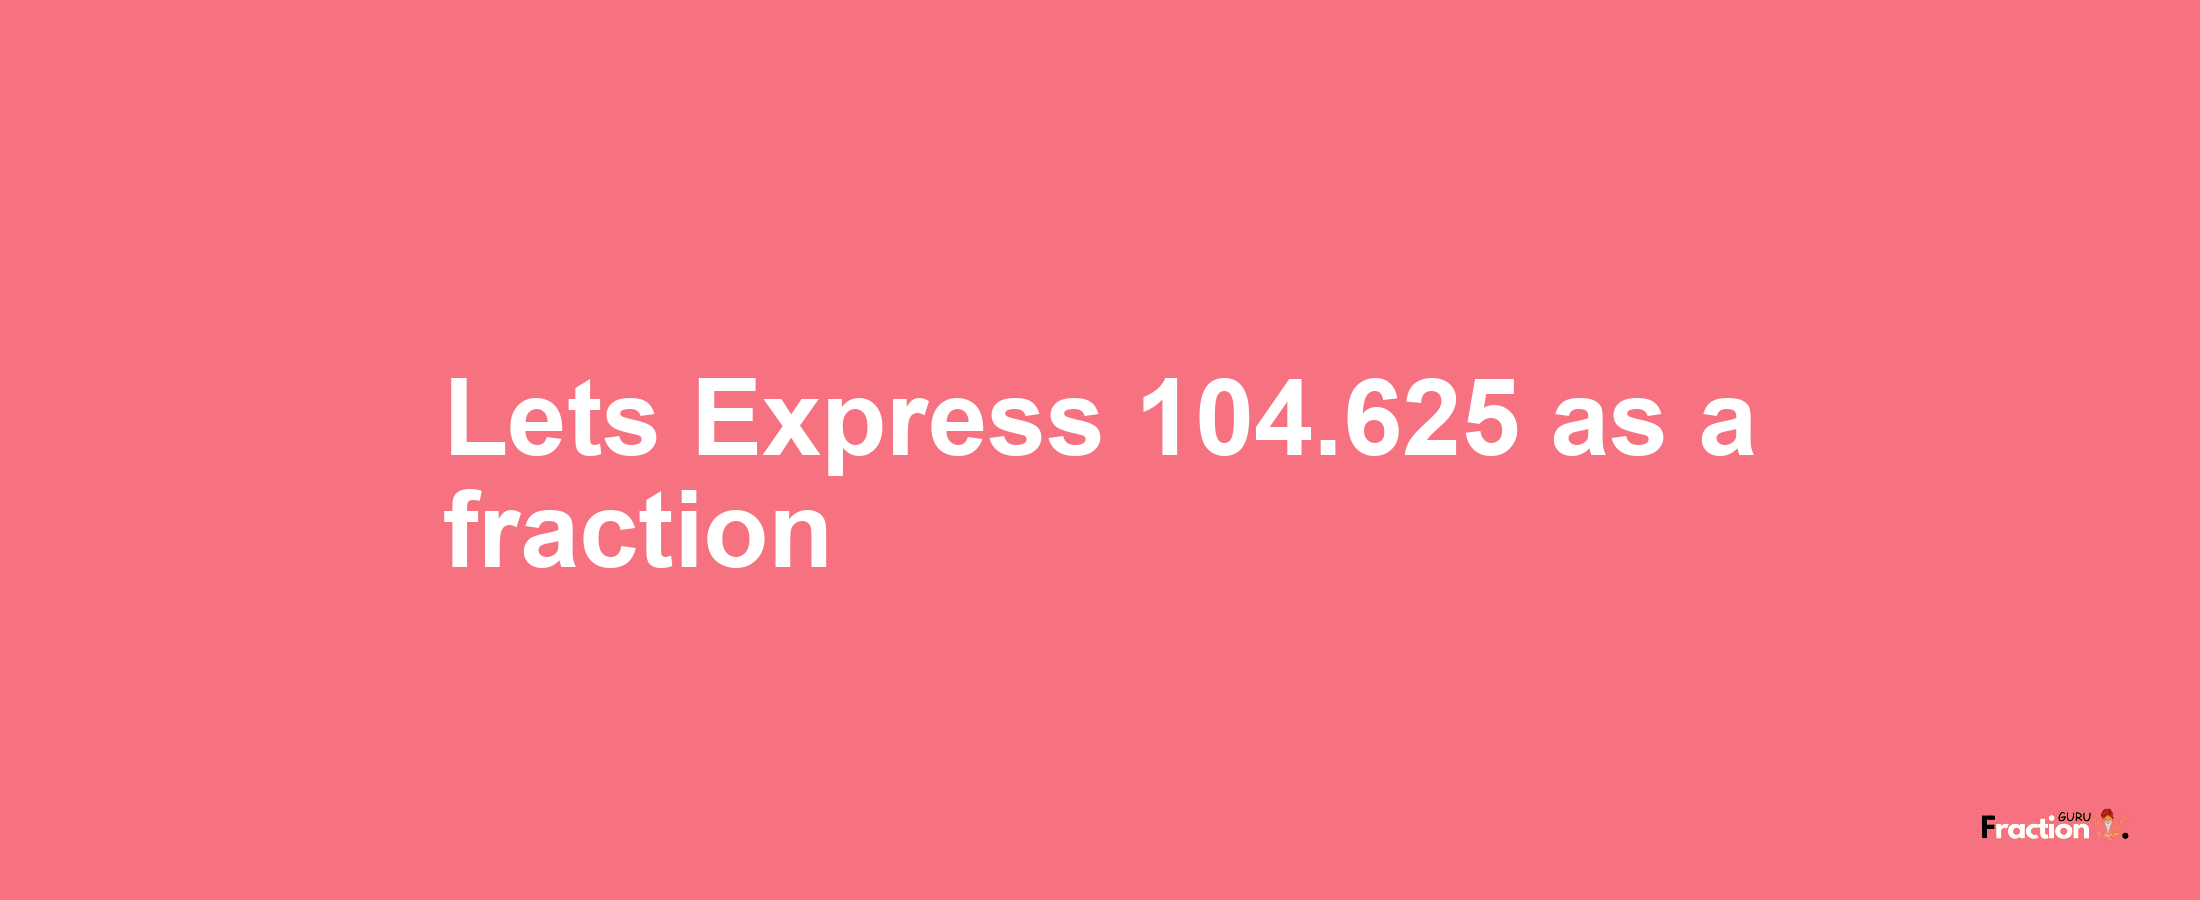 Lets Express 104.625 as afraction